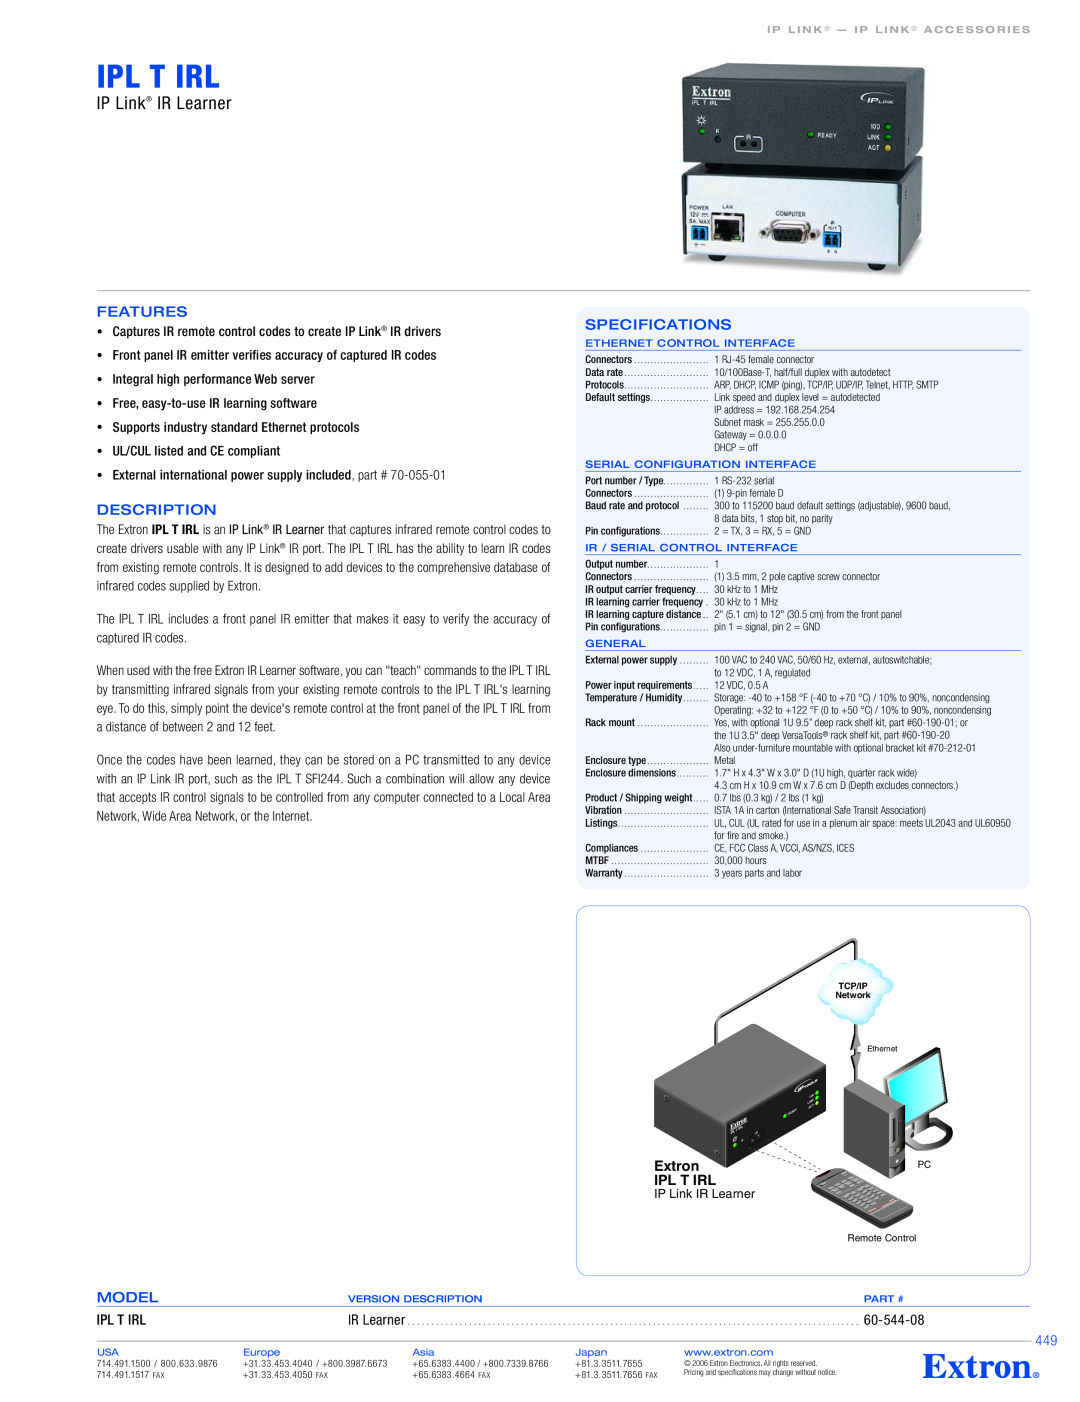 Extron electronic IPL T IRL specifications Ipl T Irl, IP Link IR Learner, Features, Description, Specifications, Extron 